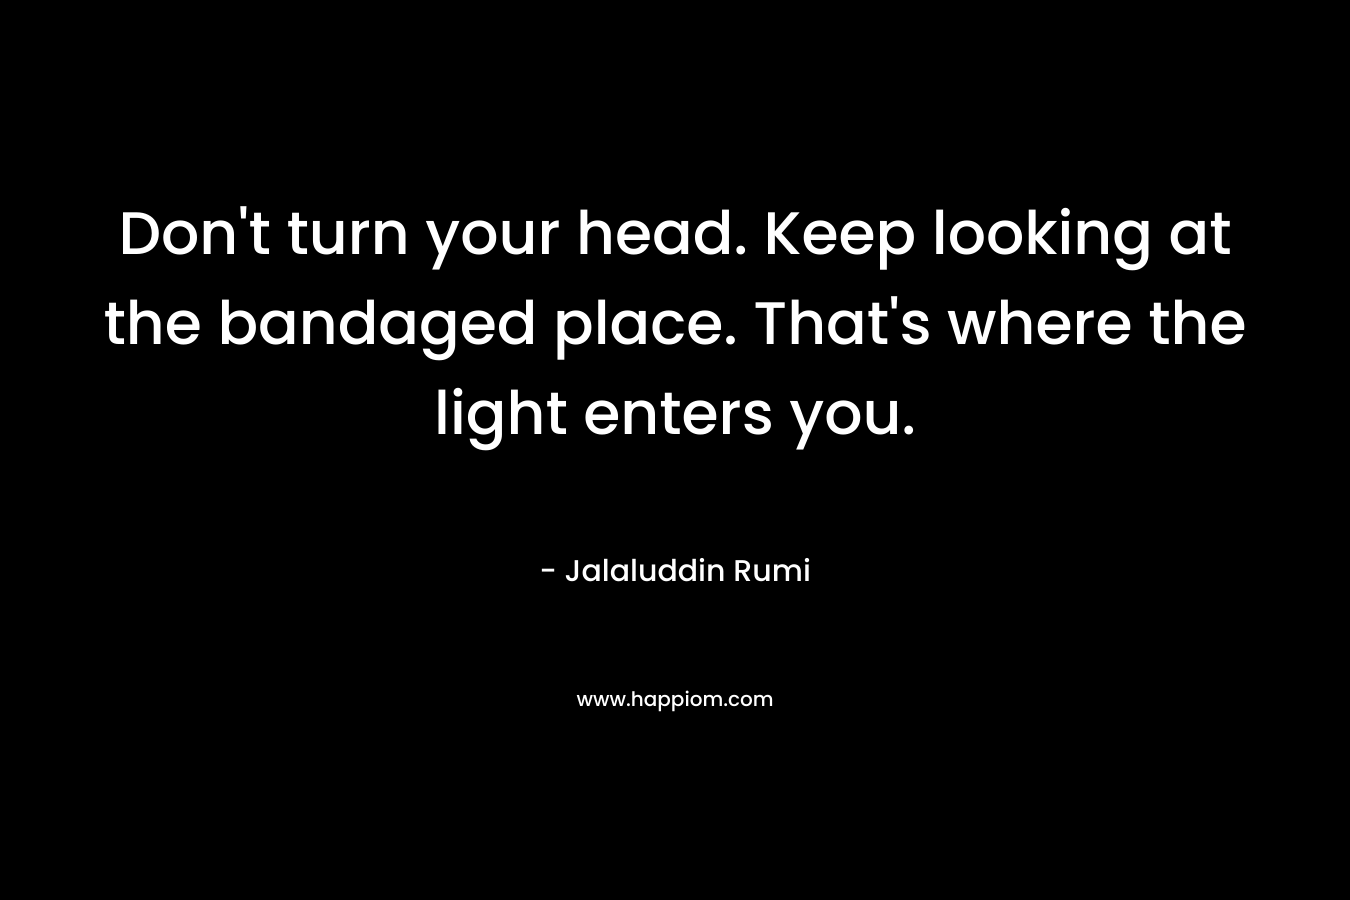 Don’t turn your head. Keep looking at the bandaged place. That’s where the light enters you. – Jalaluddin Rumi